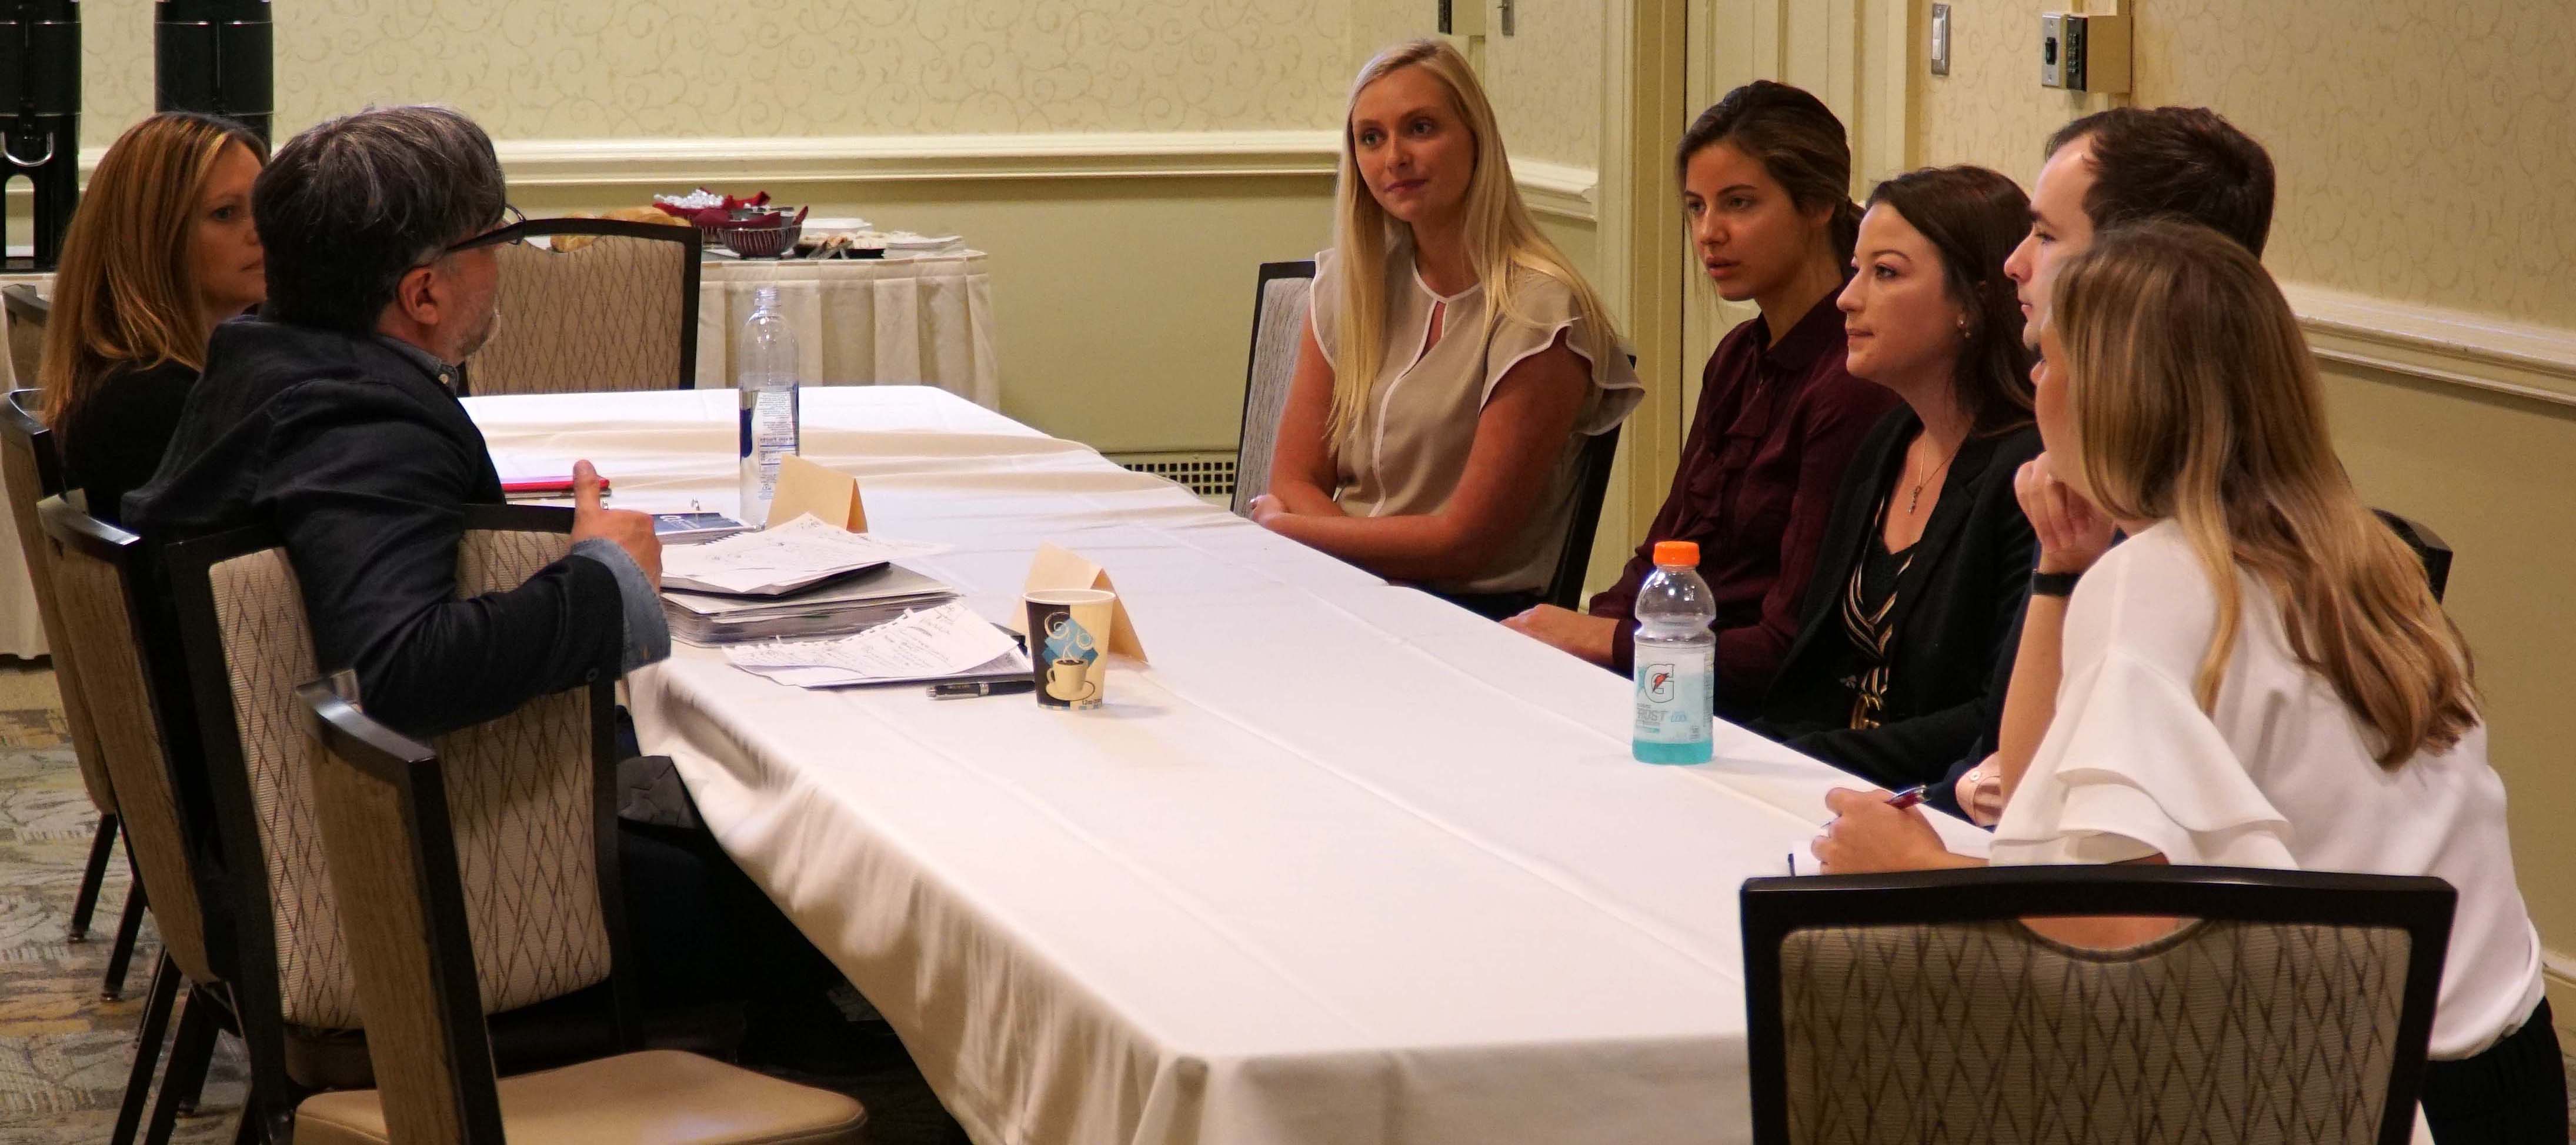 Students talk with Harman executives during Strategy Works